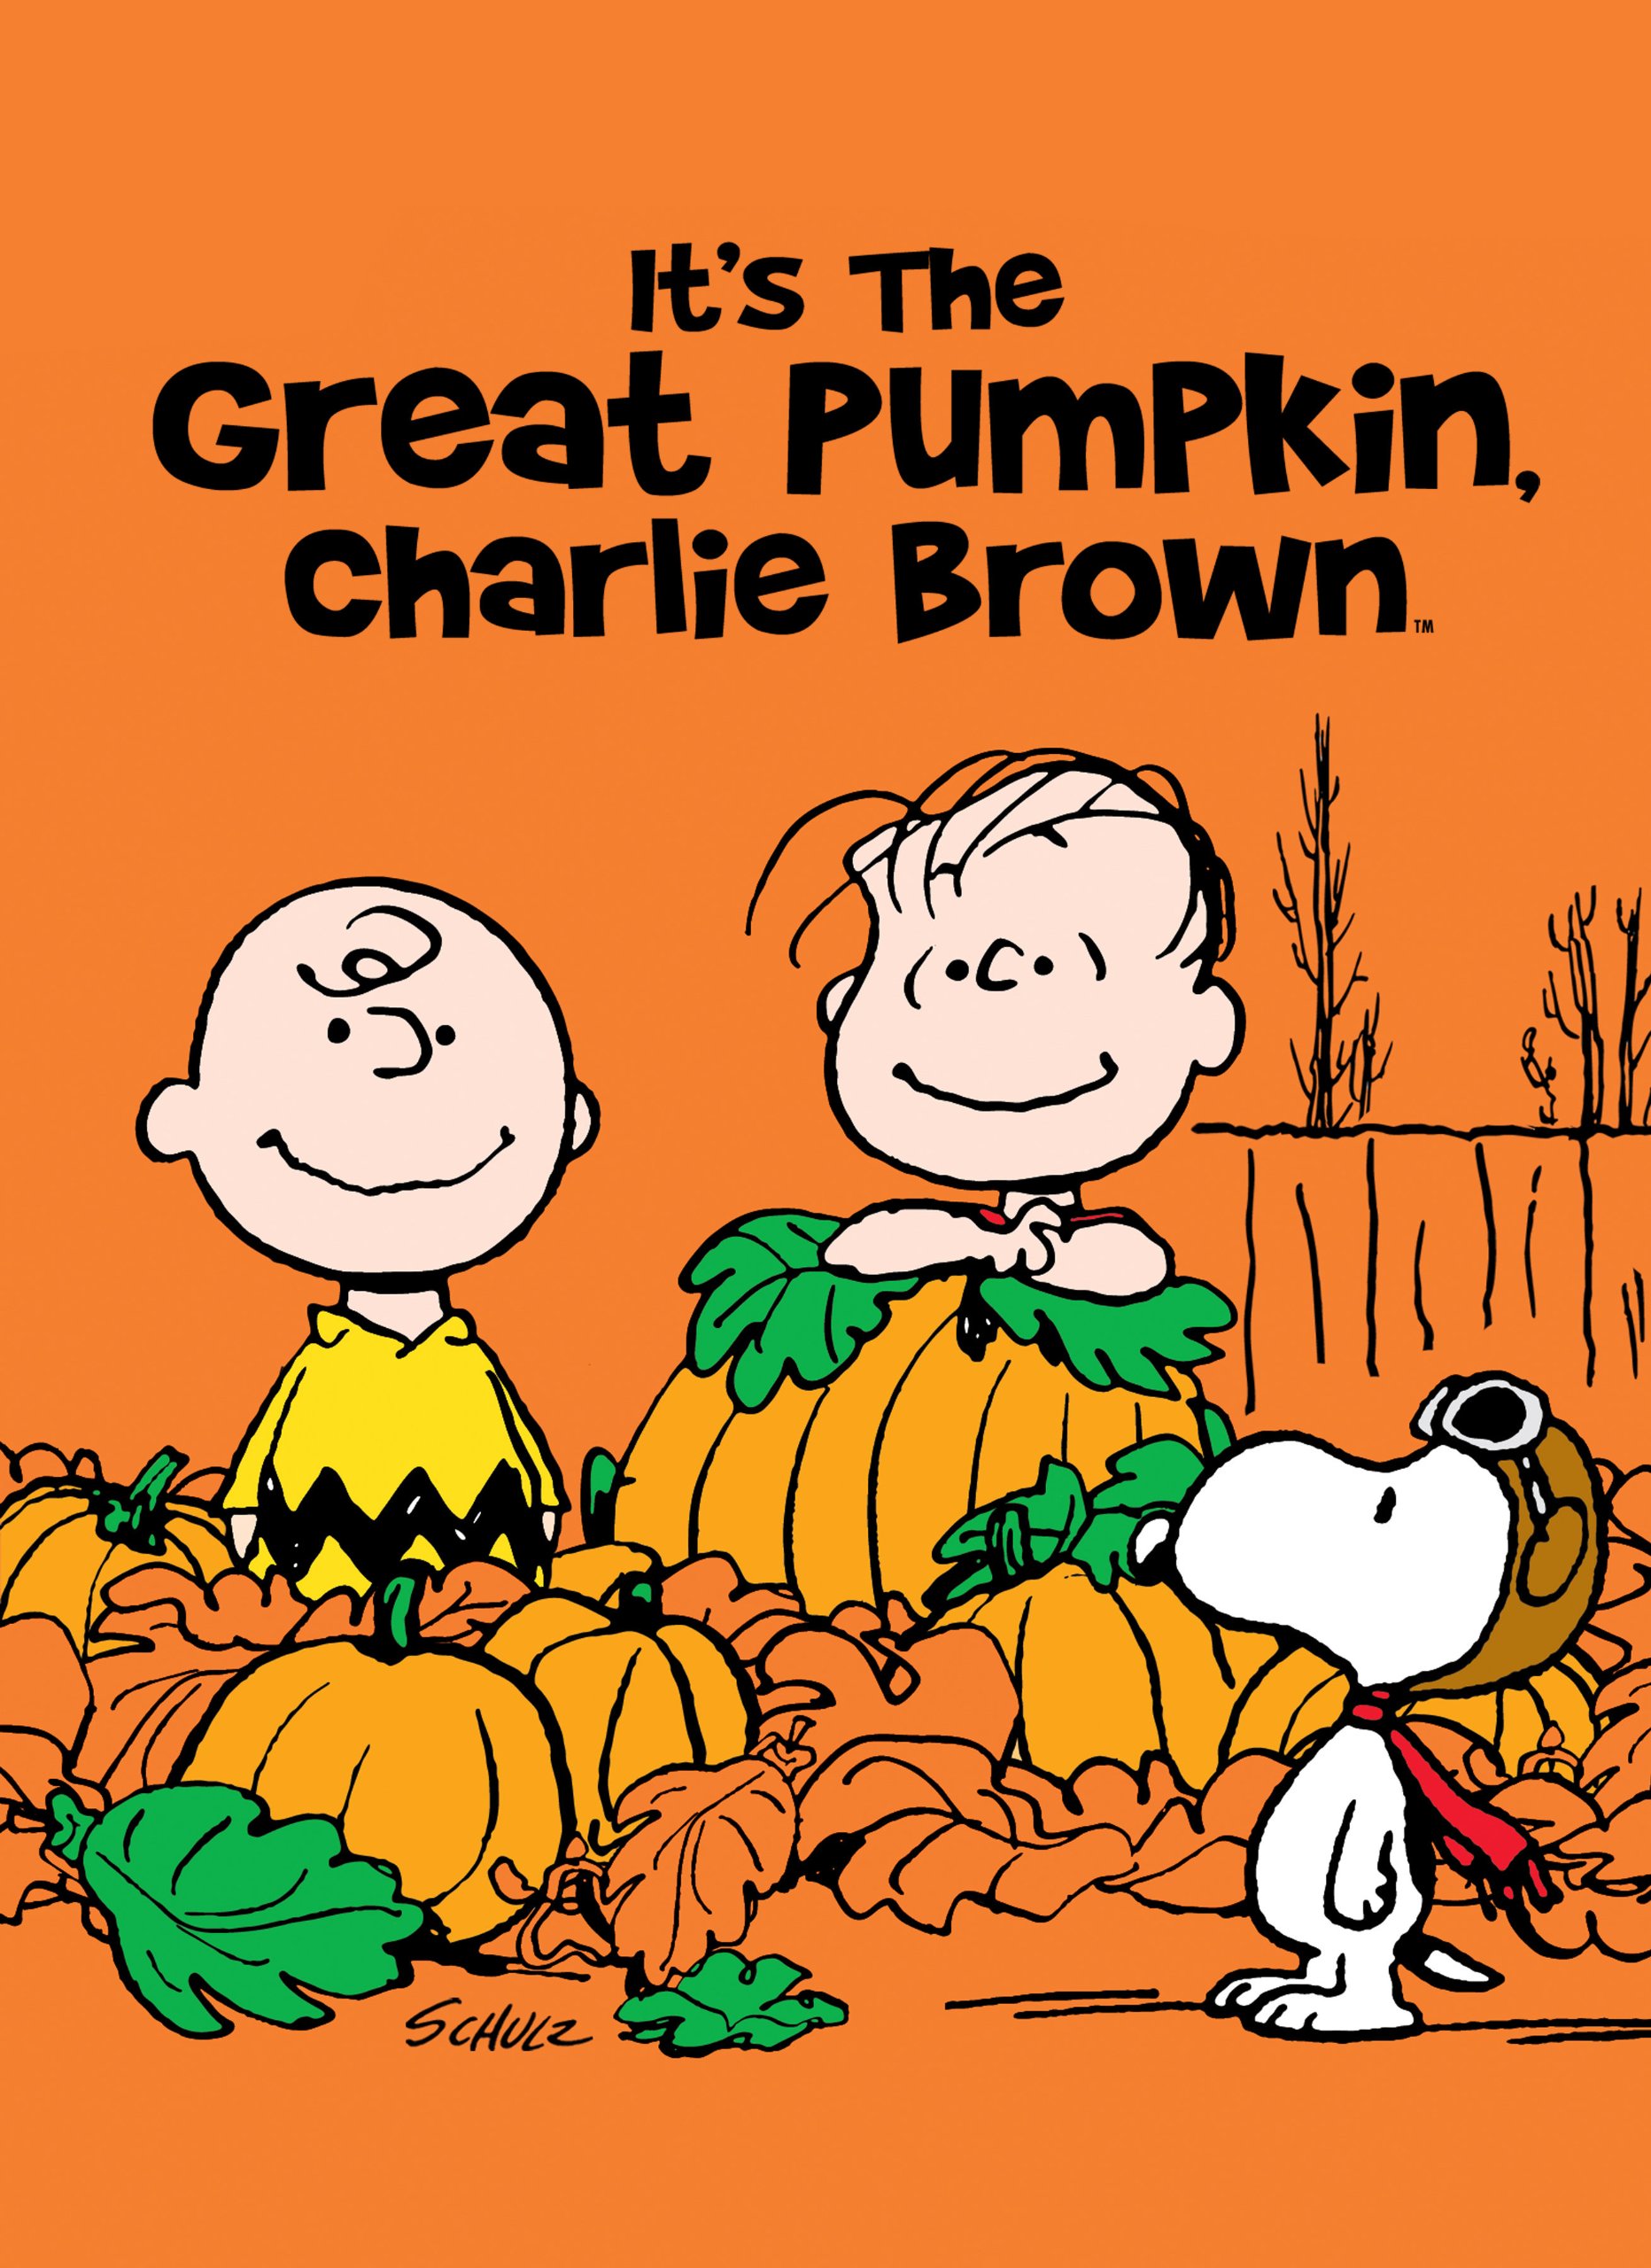 The Great Pumpkin movie poster